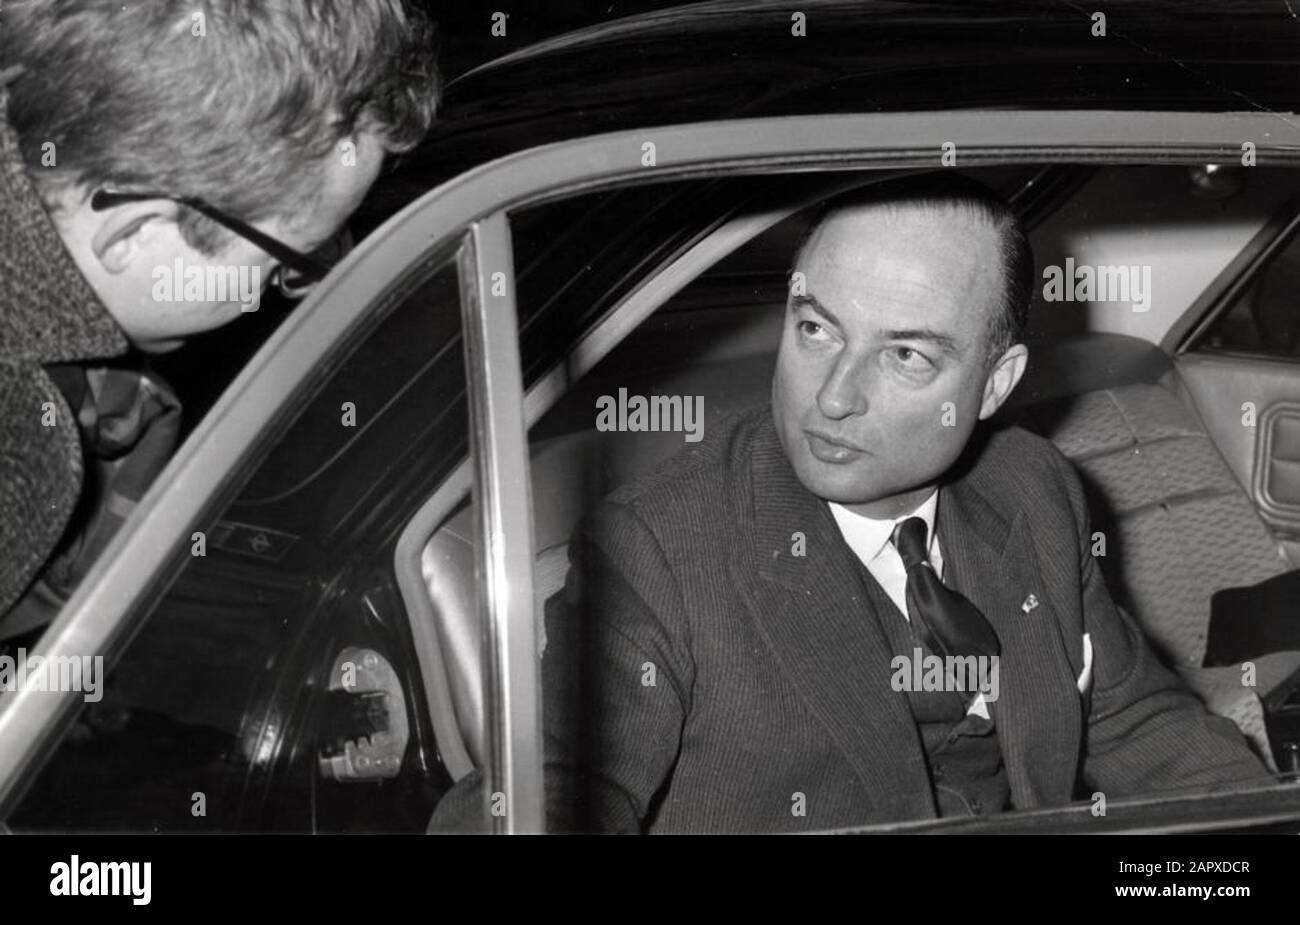 Schmelzer, W.K.N.. (CVP). Informator Schmelzer, after his visit to the Queen at the Soestdijk Palace, is speaking to journalists/the press from his car. Netherlands, Baarn/Soest, 12 March 1965.; Stock Photo